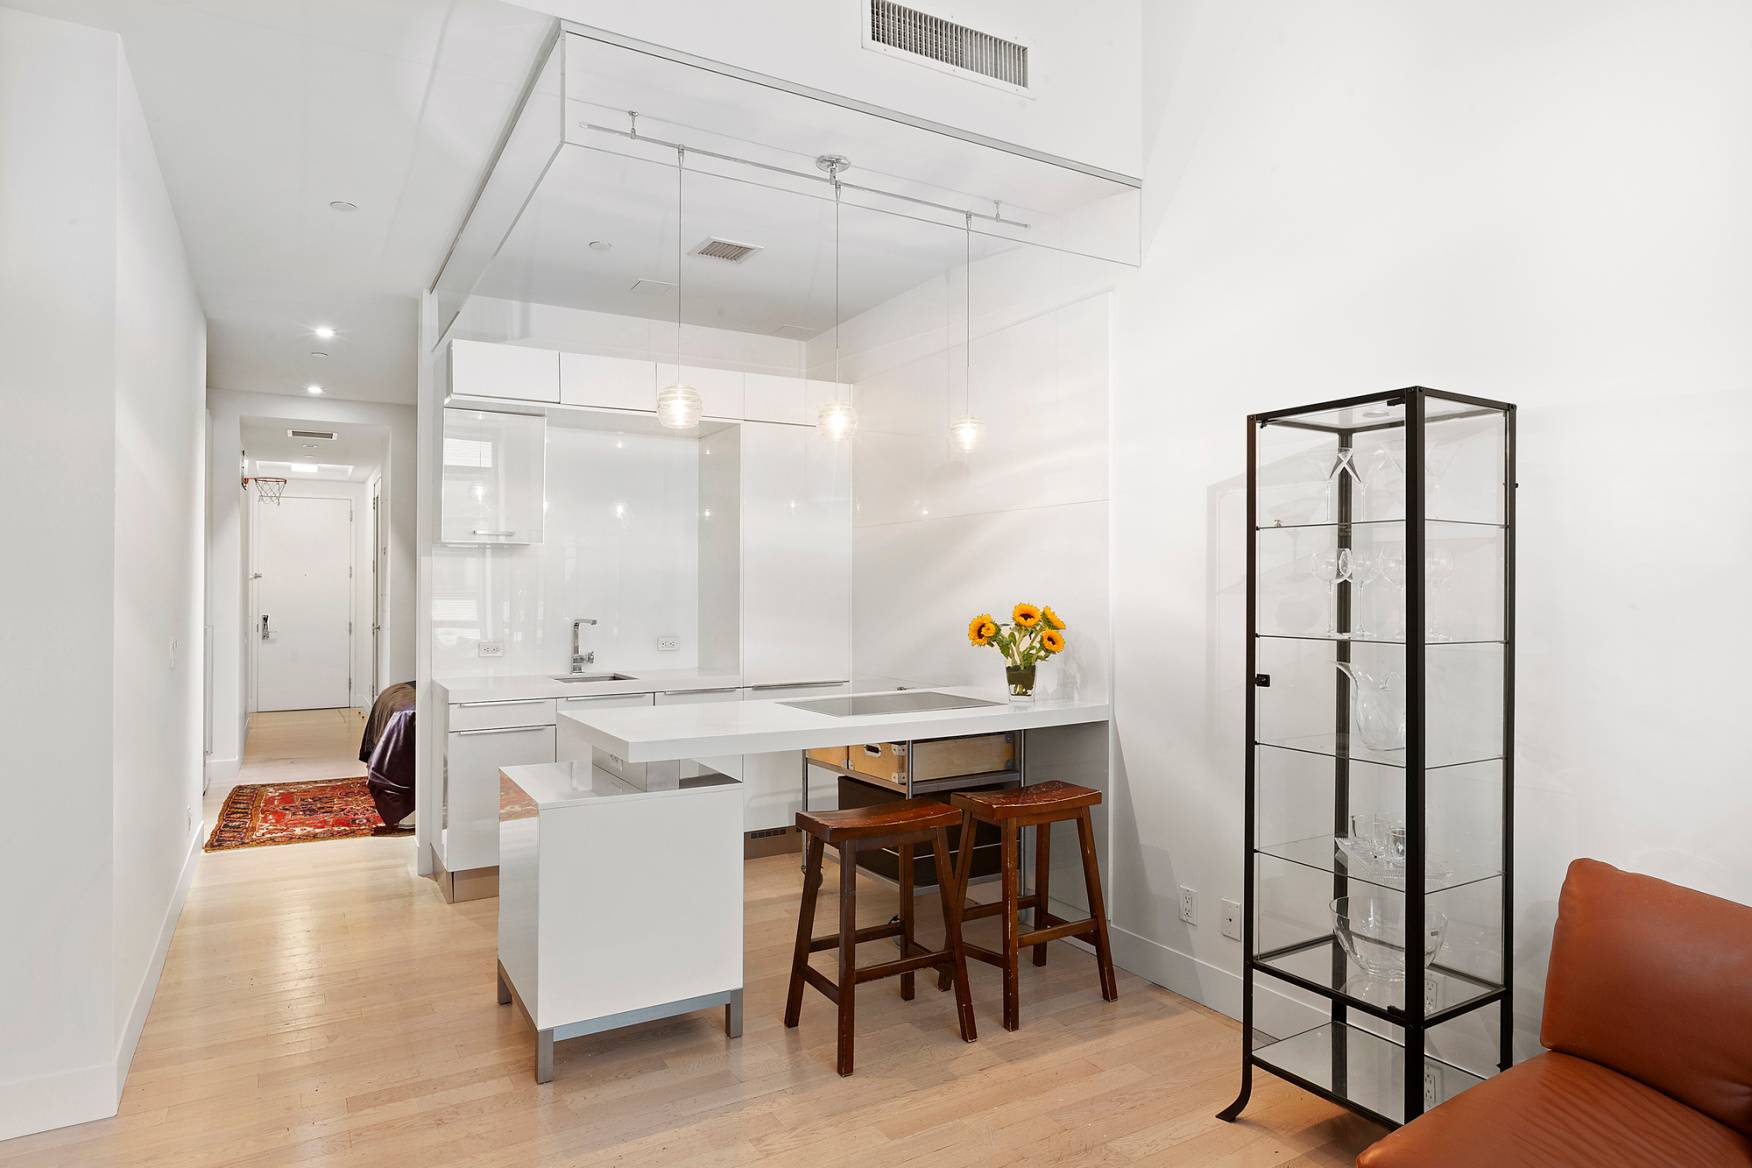 Welcome to the District. A centrally located condo in the Financial District.